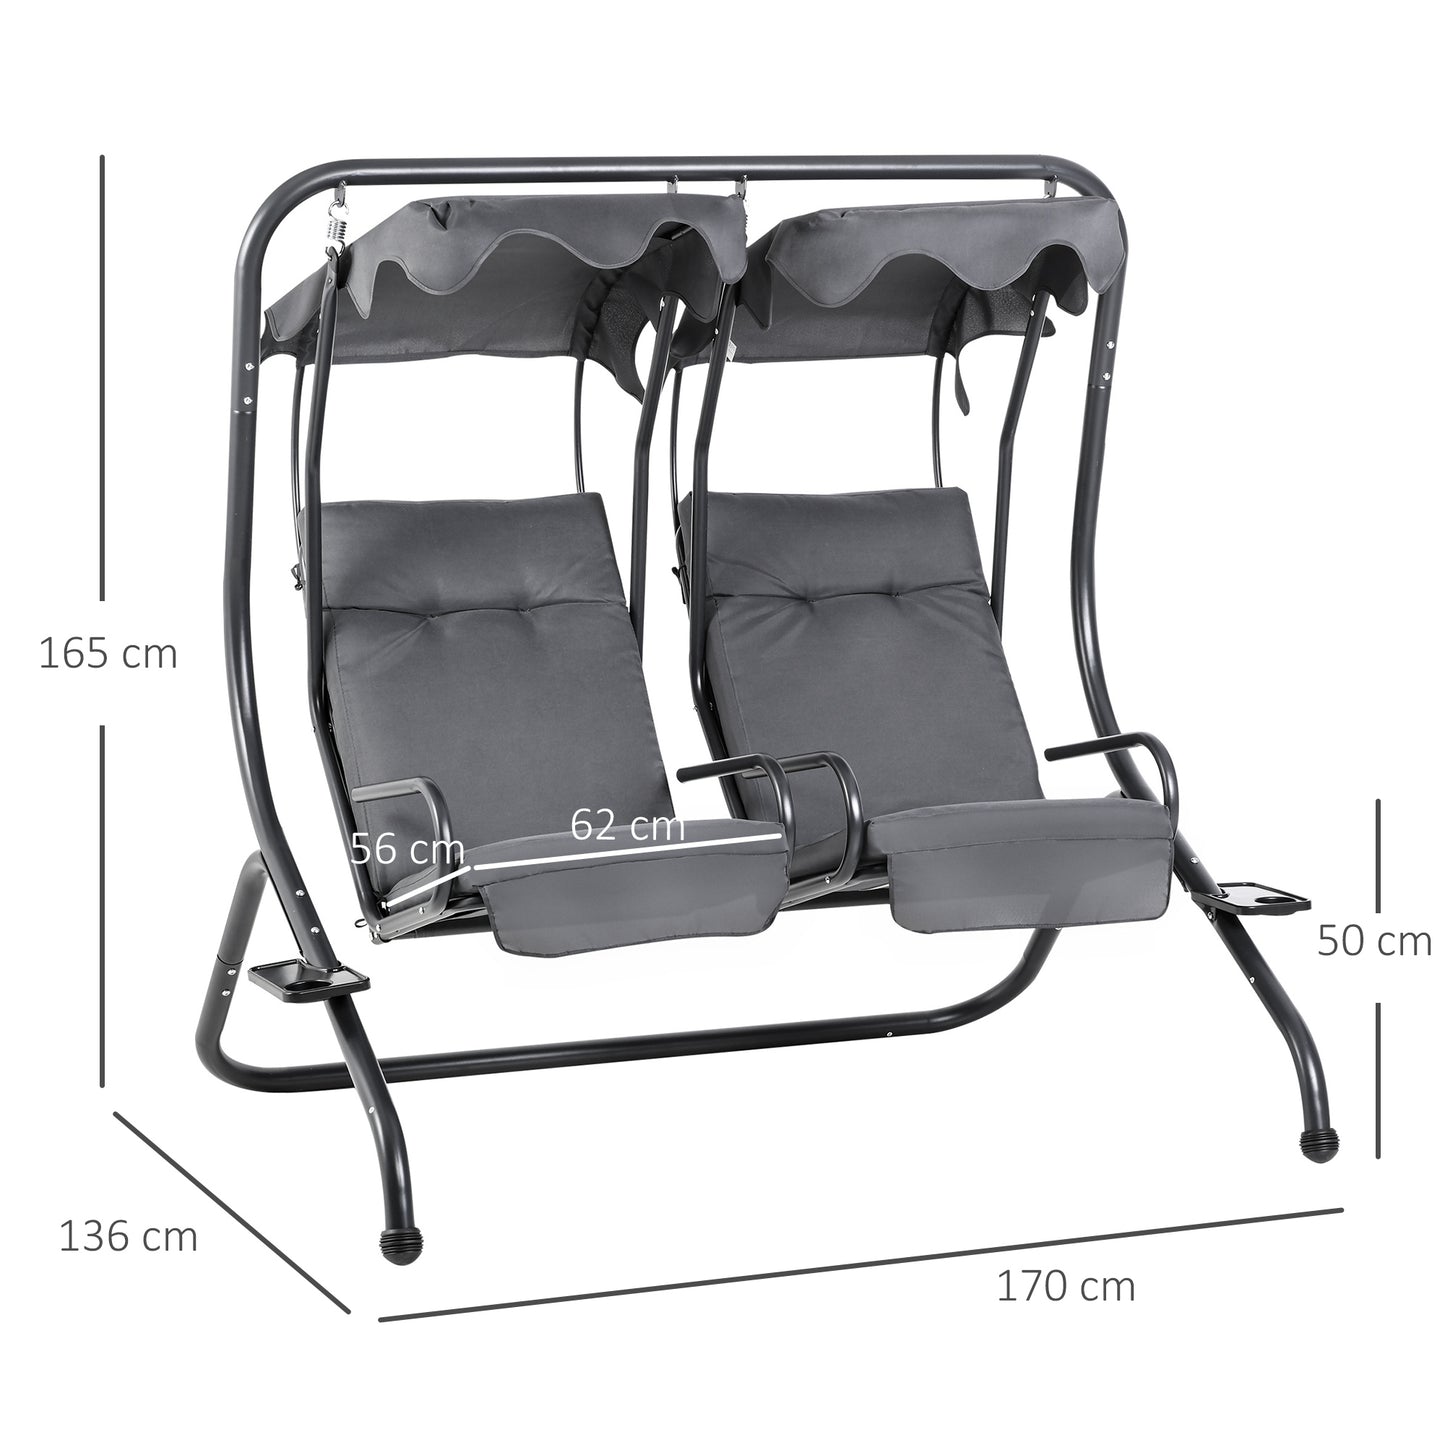 Outsunny Canopy Swing 2 Separate Relax Chairs w/ Handrails, Cup Holders